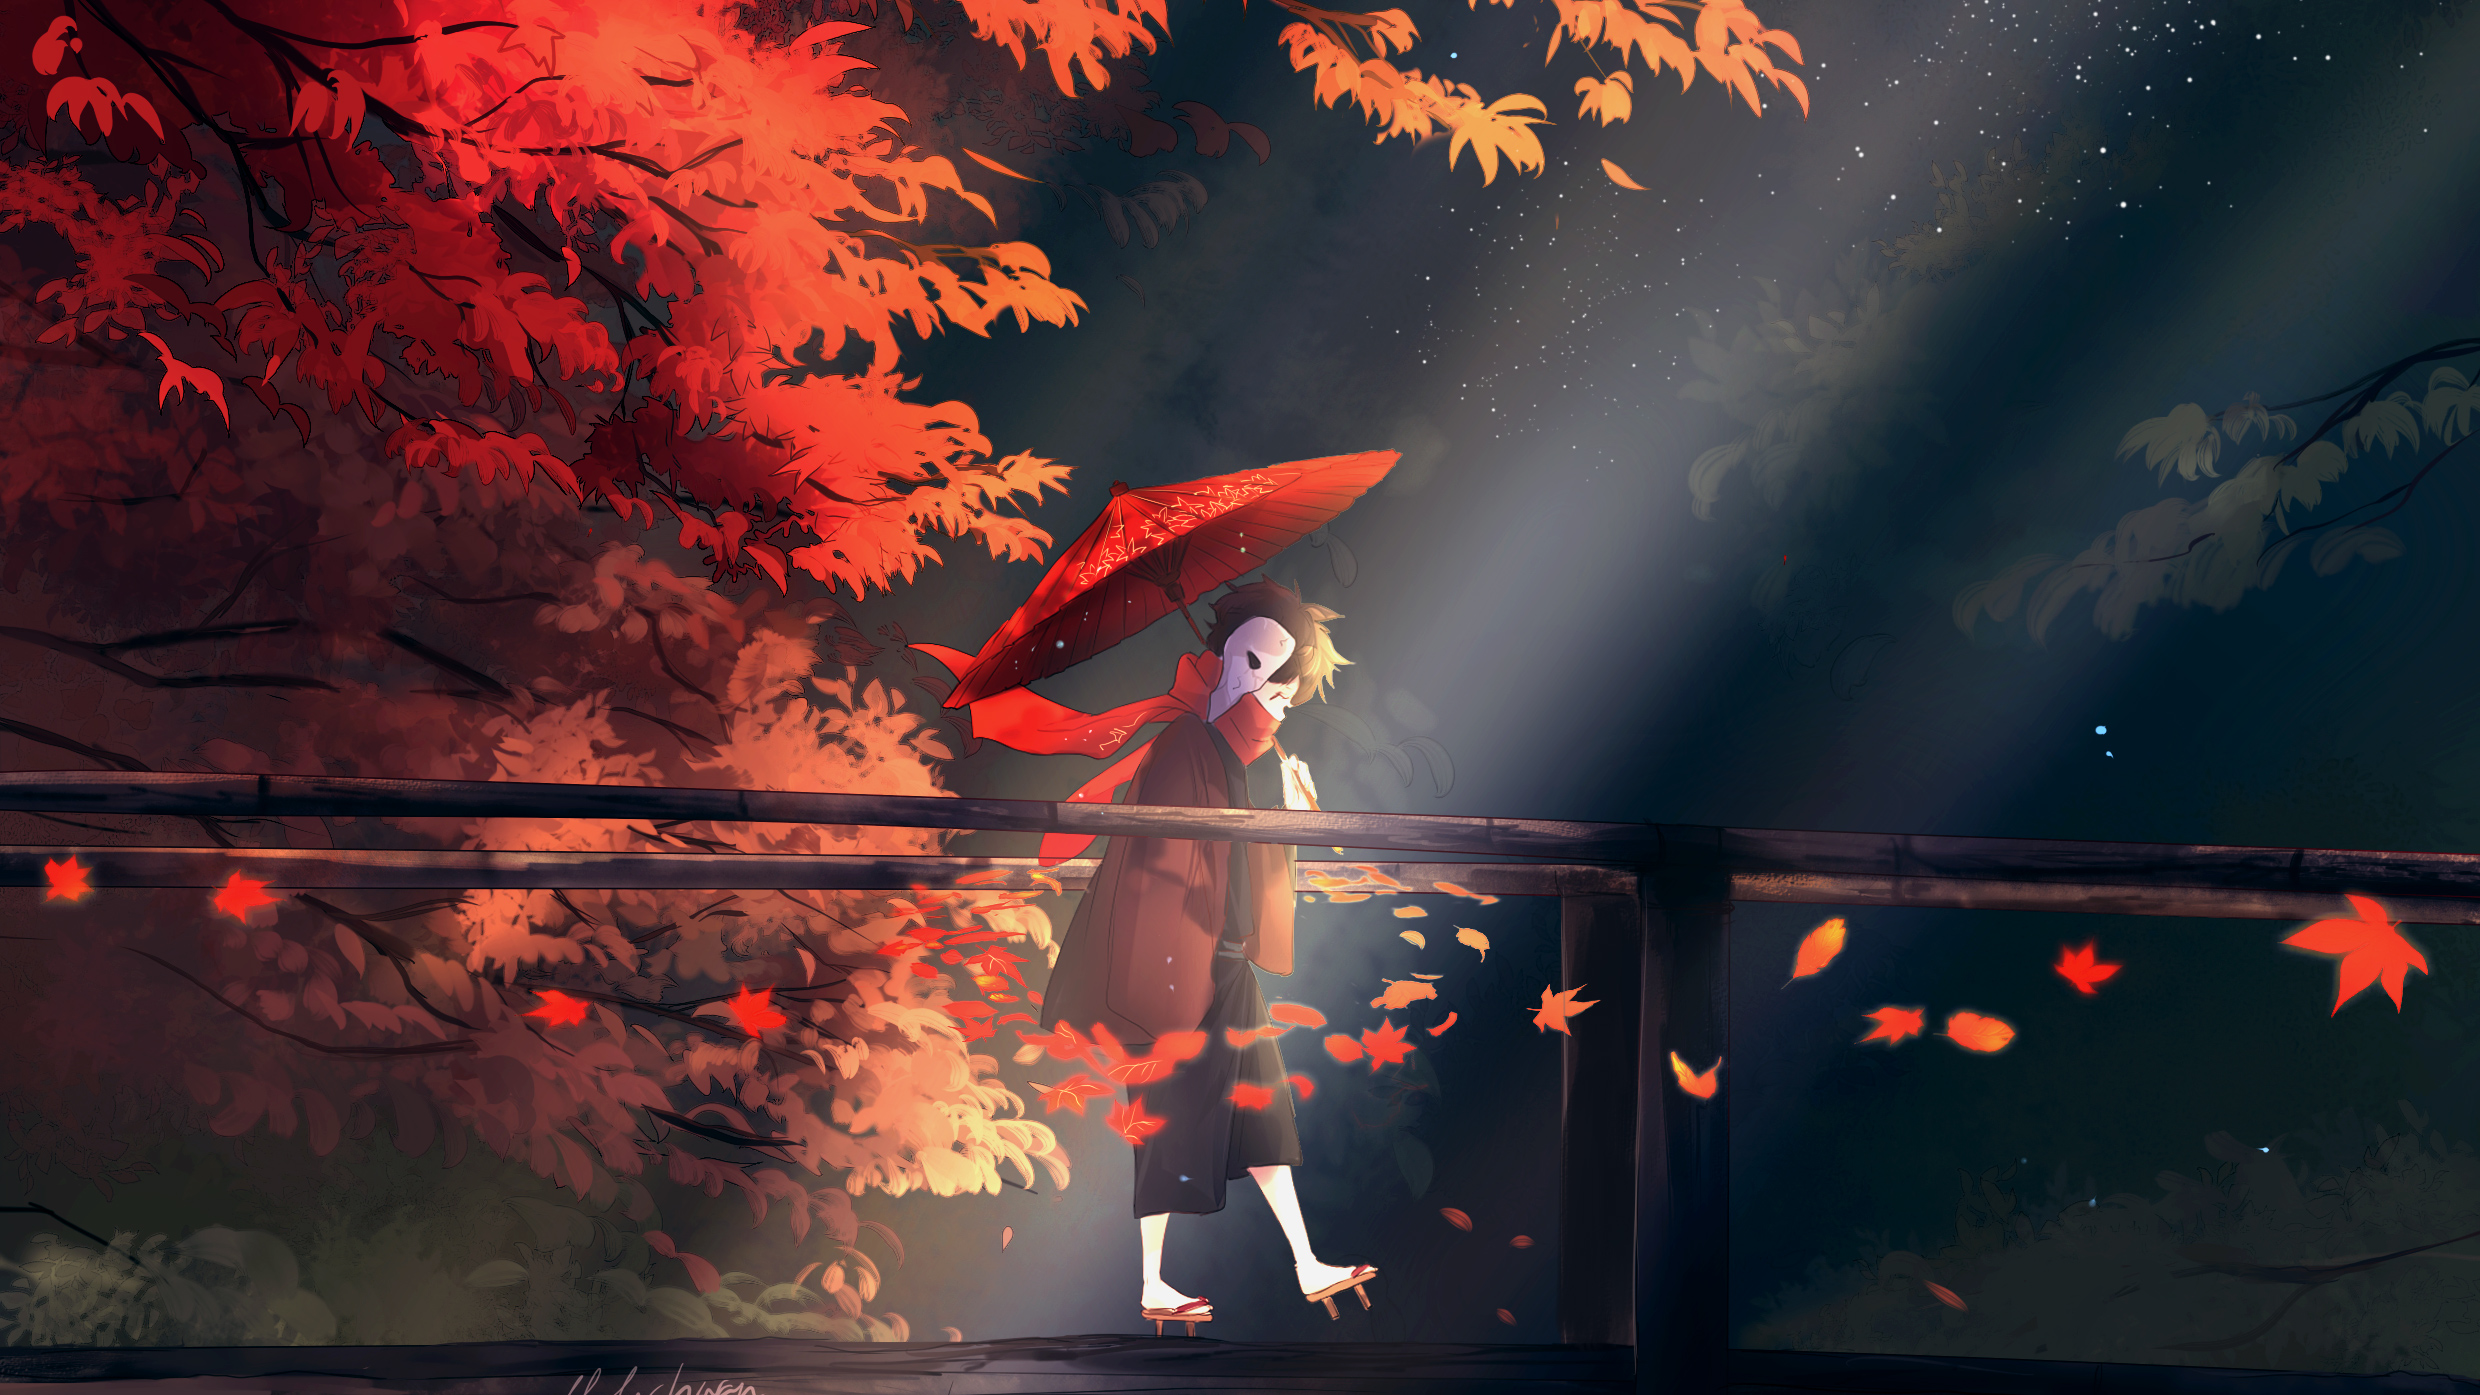 Fall art hd artist k wallpapers images backgrounds photos and pictures